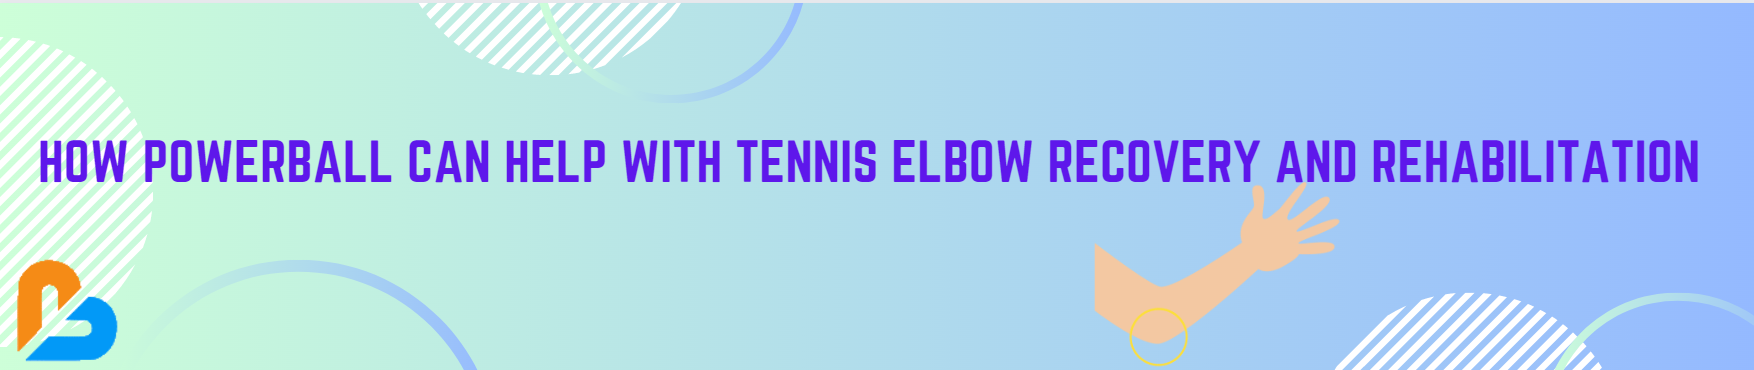 How Powerball Can Help with Tennis Elbow Recovery and Rehabilitation